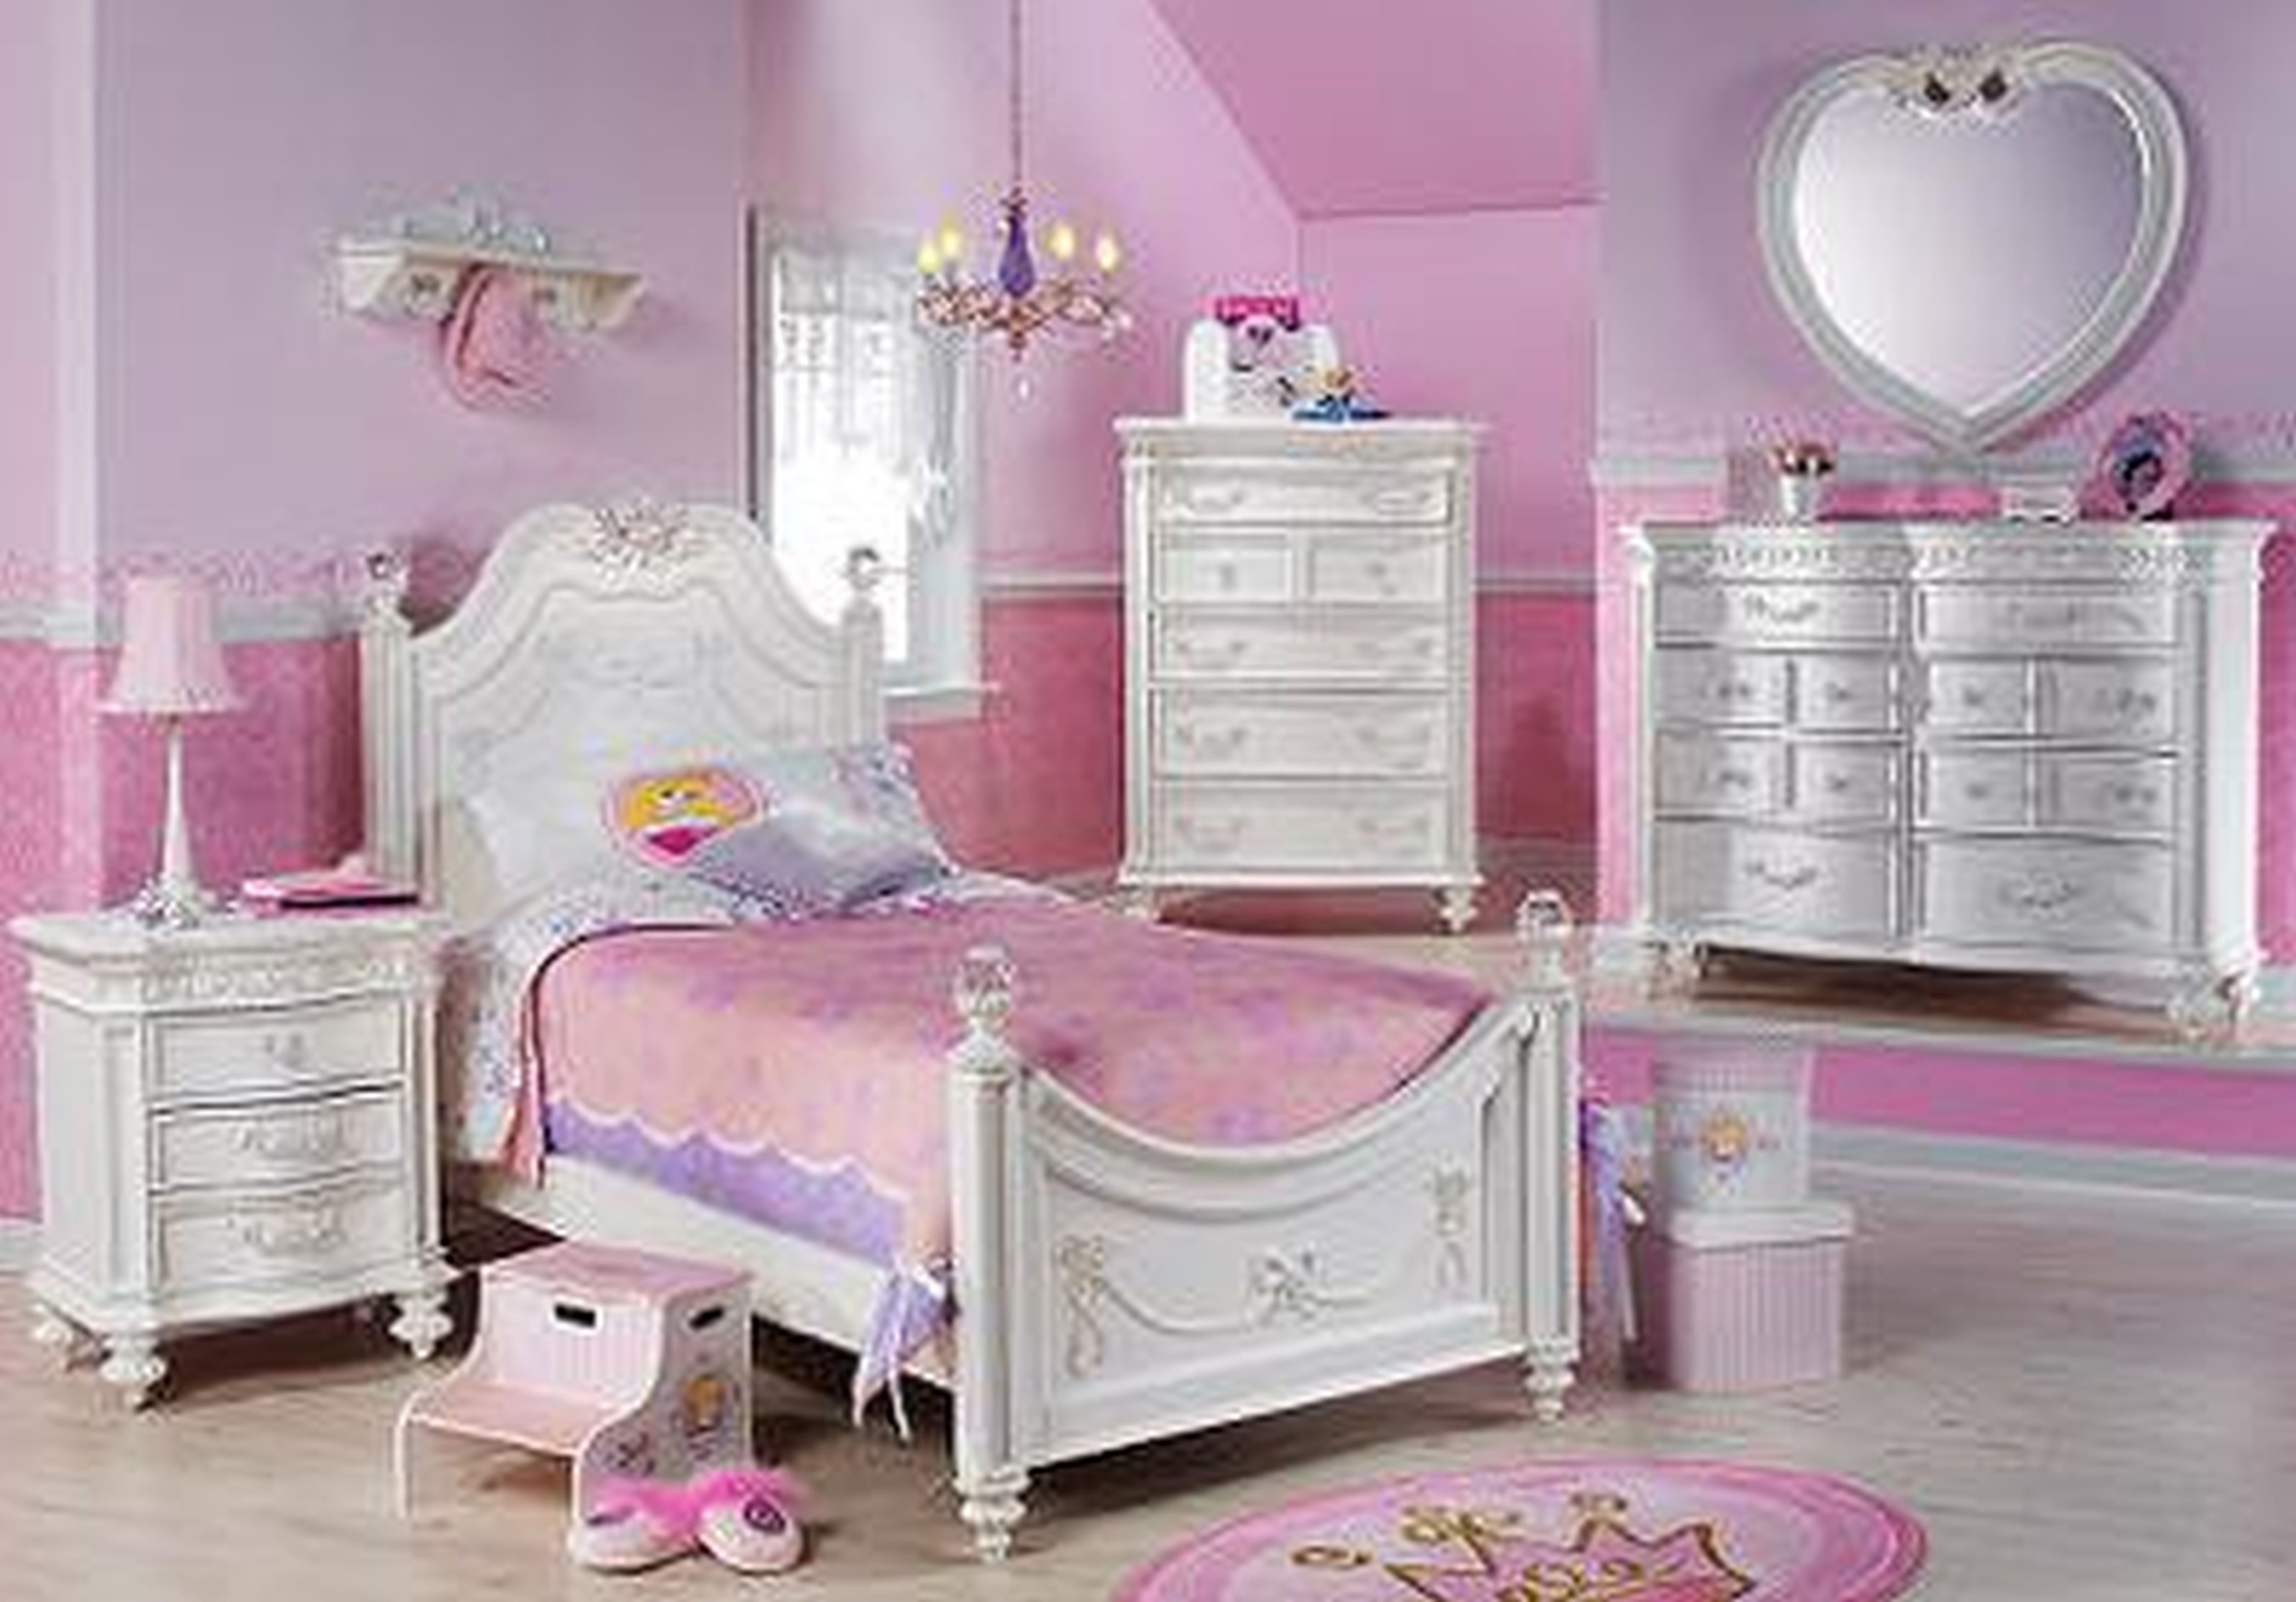 10 Attractive Toddler Room Ideas For Girls fascinating toddler girl room ideas in addition to bedroom the best 1 2022